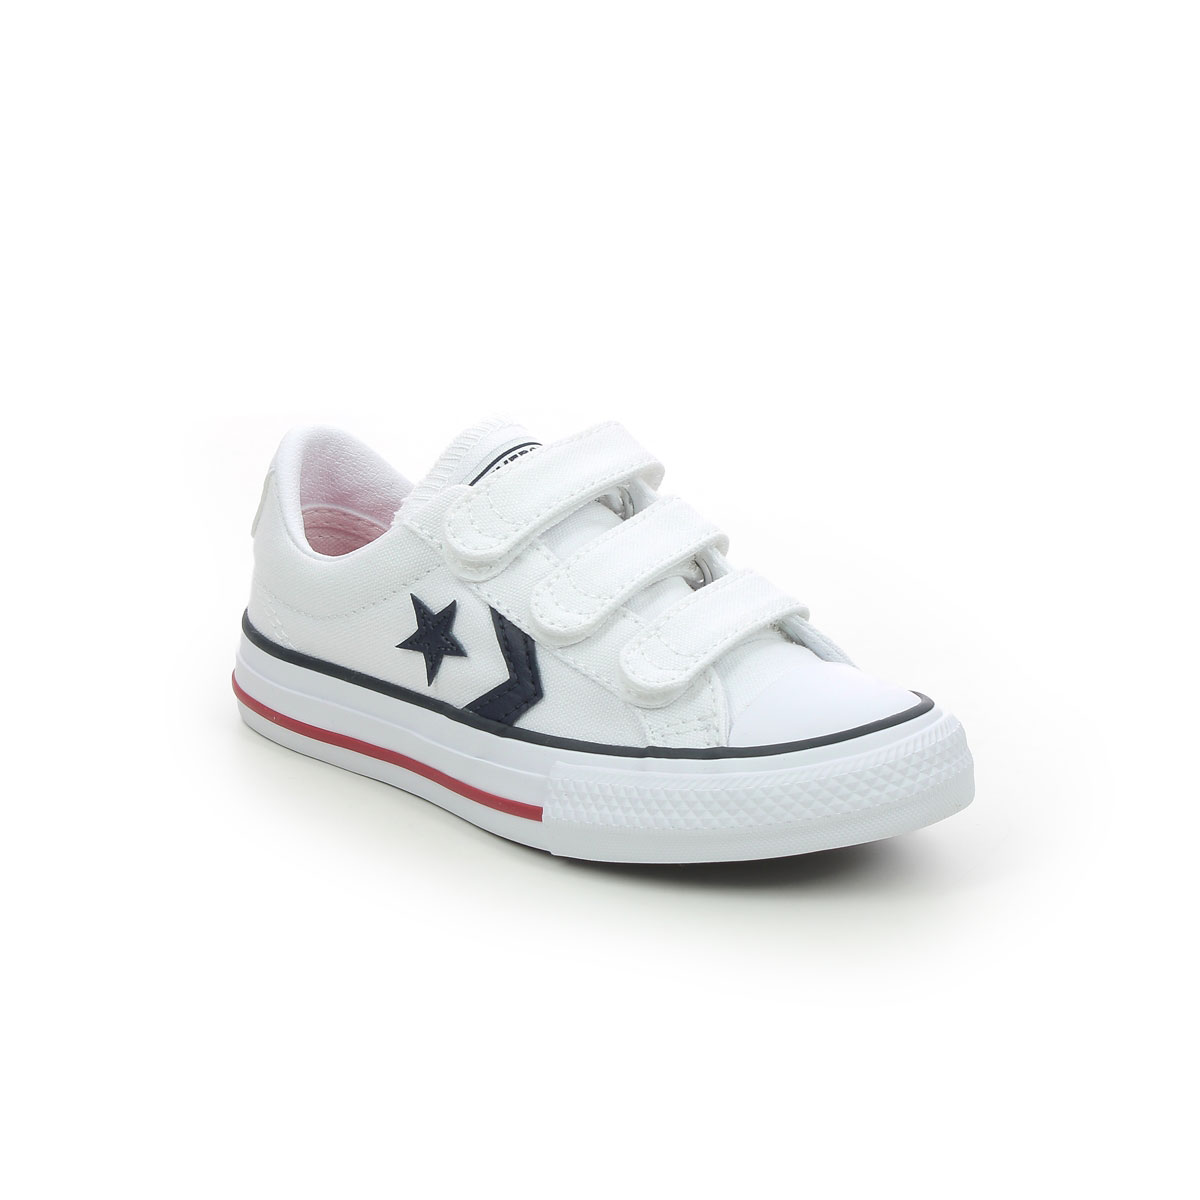 Converse Star Player 3v White Kids Boys Trainers 315660C-001 in a Plain Canvas in Size 2